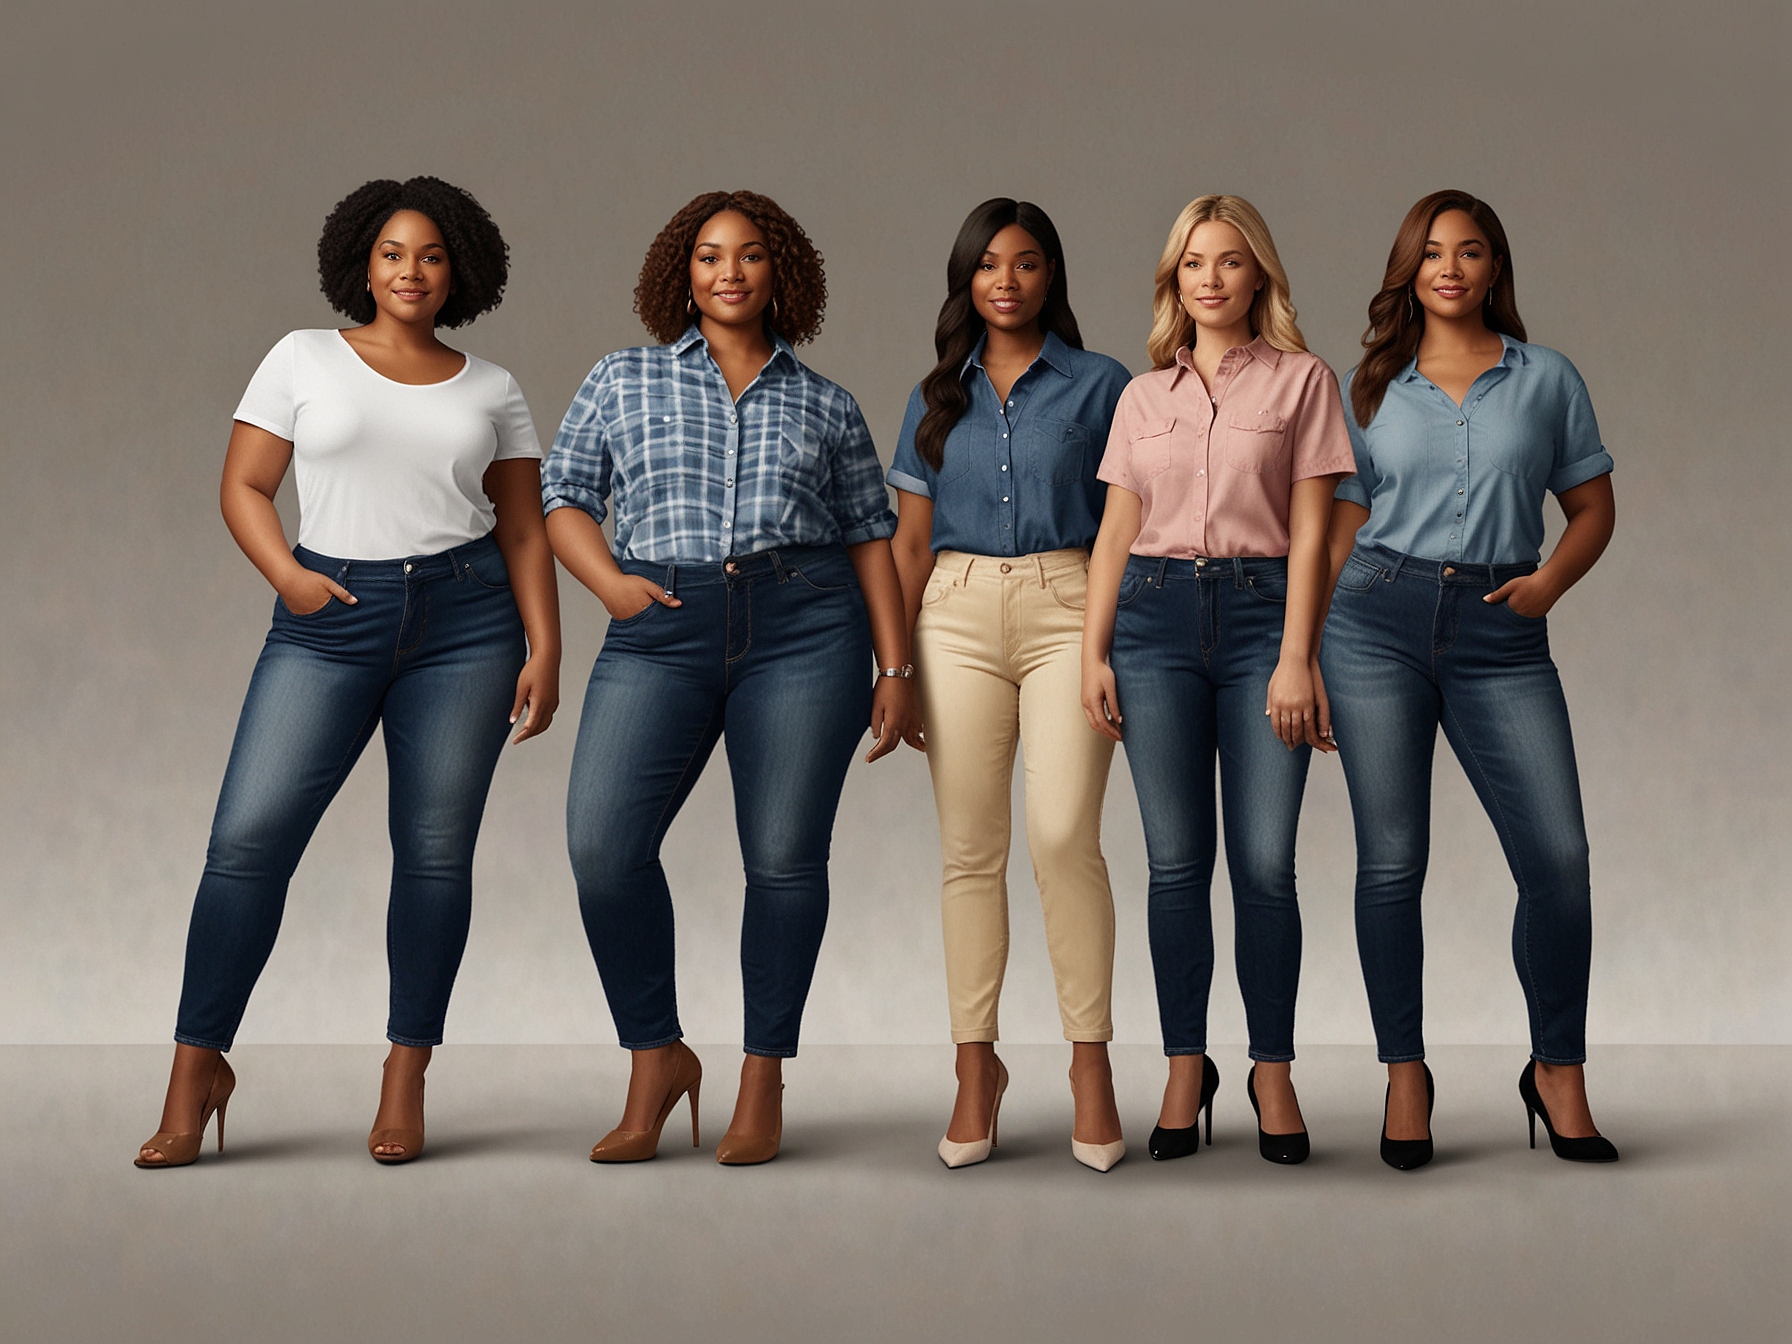 A group of diverse individuals showcasing M&S jeans in various styles and shades, highlighting the inclusive sizing and the perfect fit that flatters all body types.